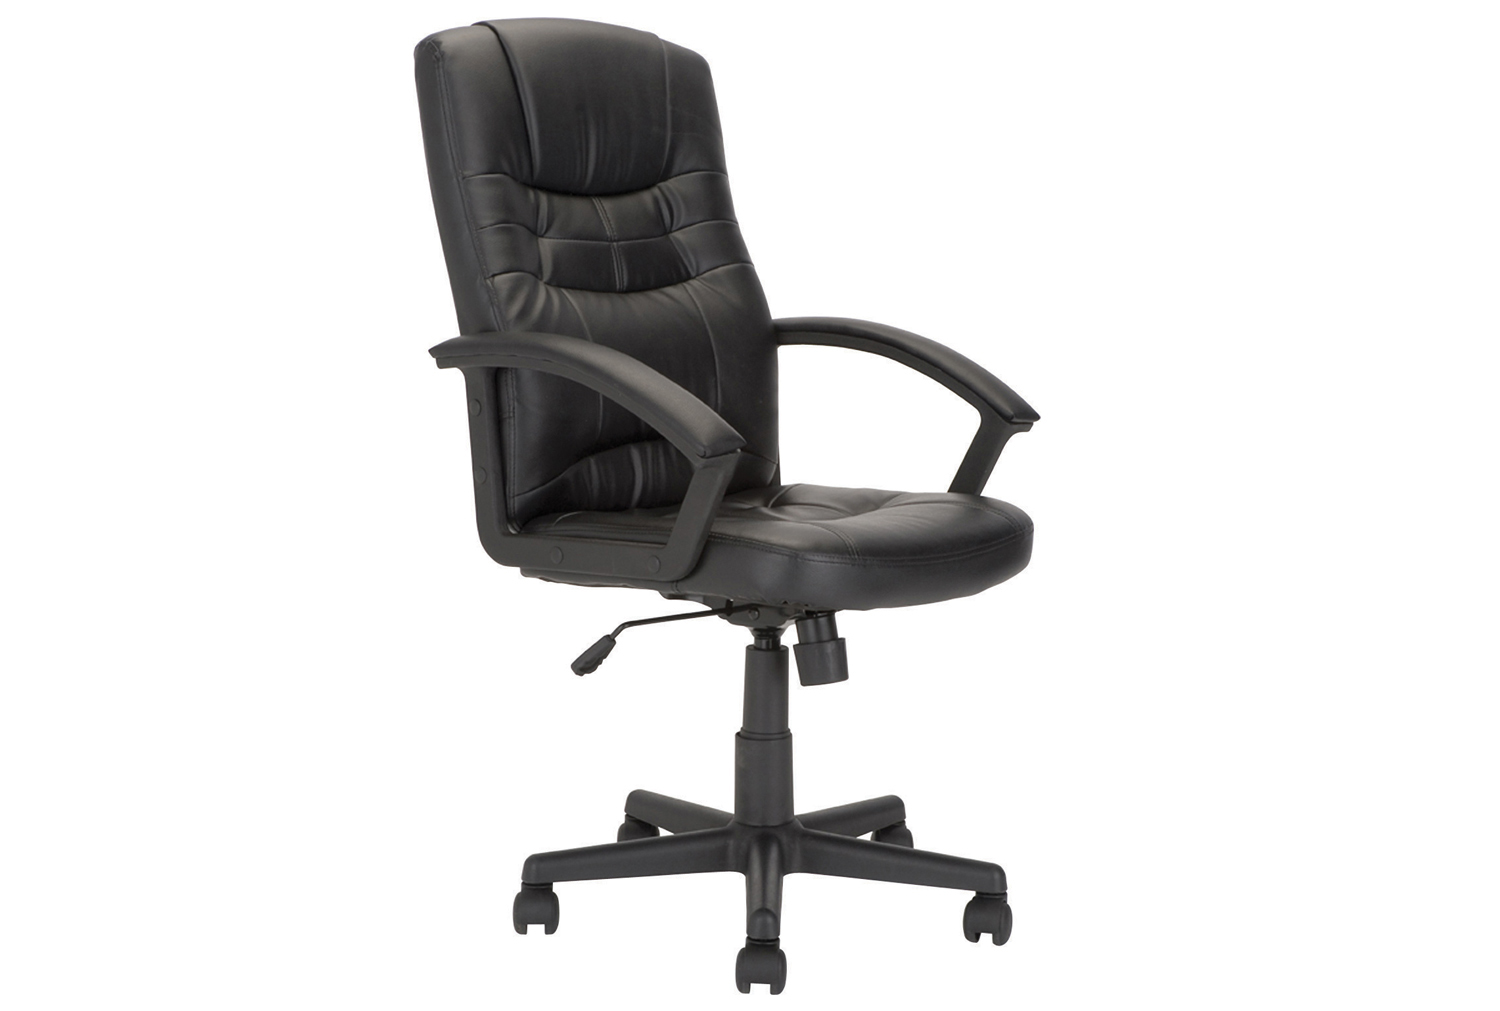 Segato Executive Office Chair, Black, Fully Installed